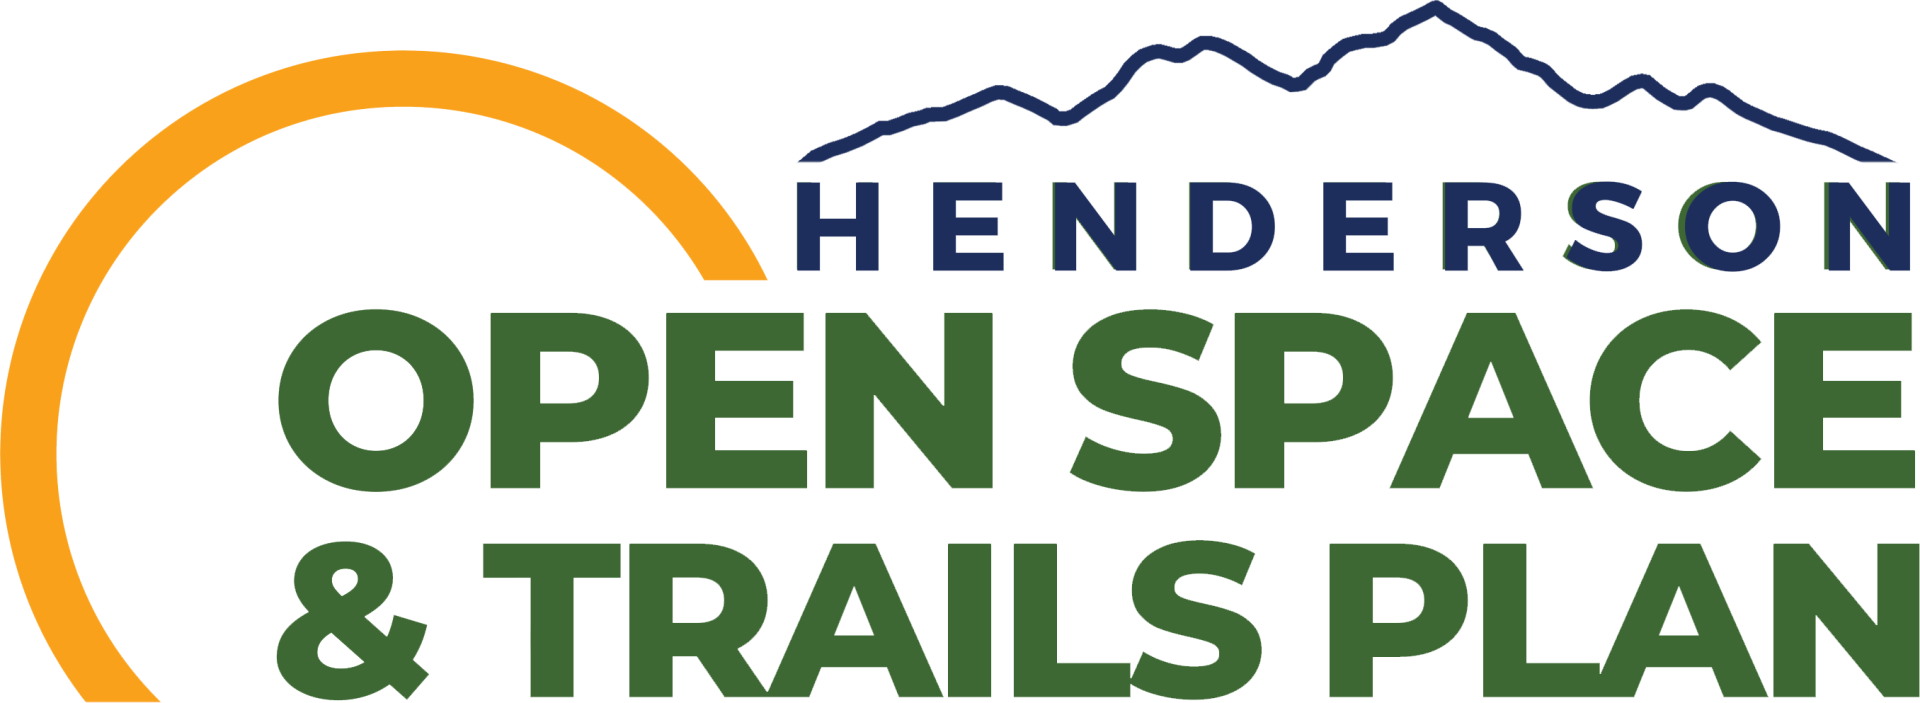 henderson open space and trails plan logo